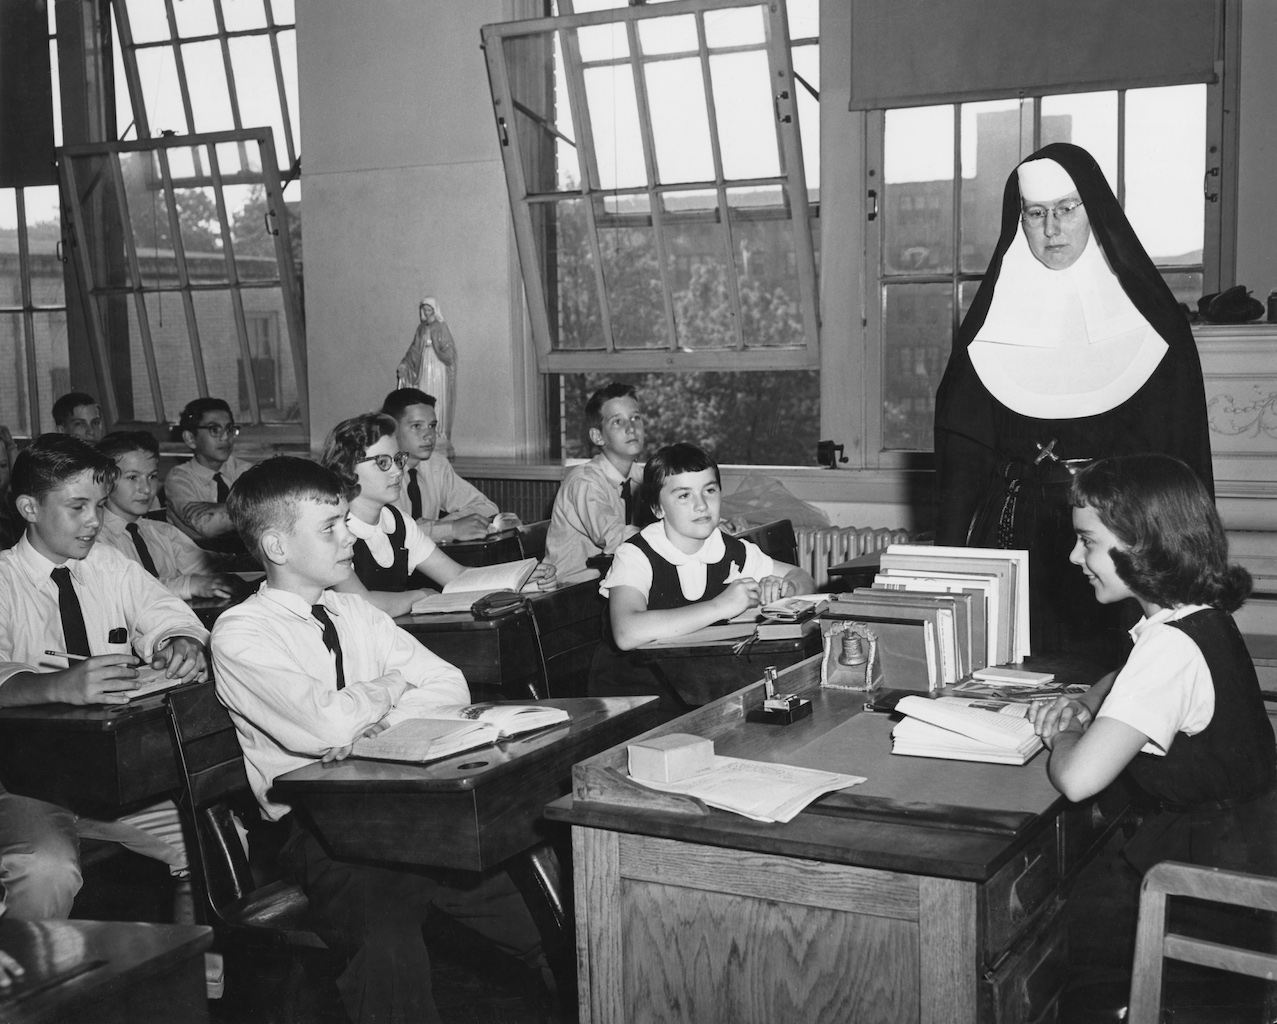  St Mary of the Lake School in Chicago, Il., circa 1960. By 1960, nationwide enrollment in Catholic schools had peaked, with more than 5.2 million students. (Photo: Authenticated News/Archive Photos/Getty Images)